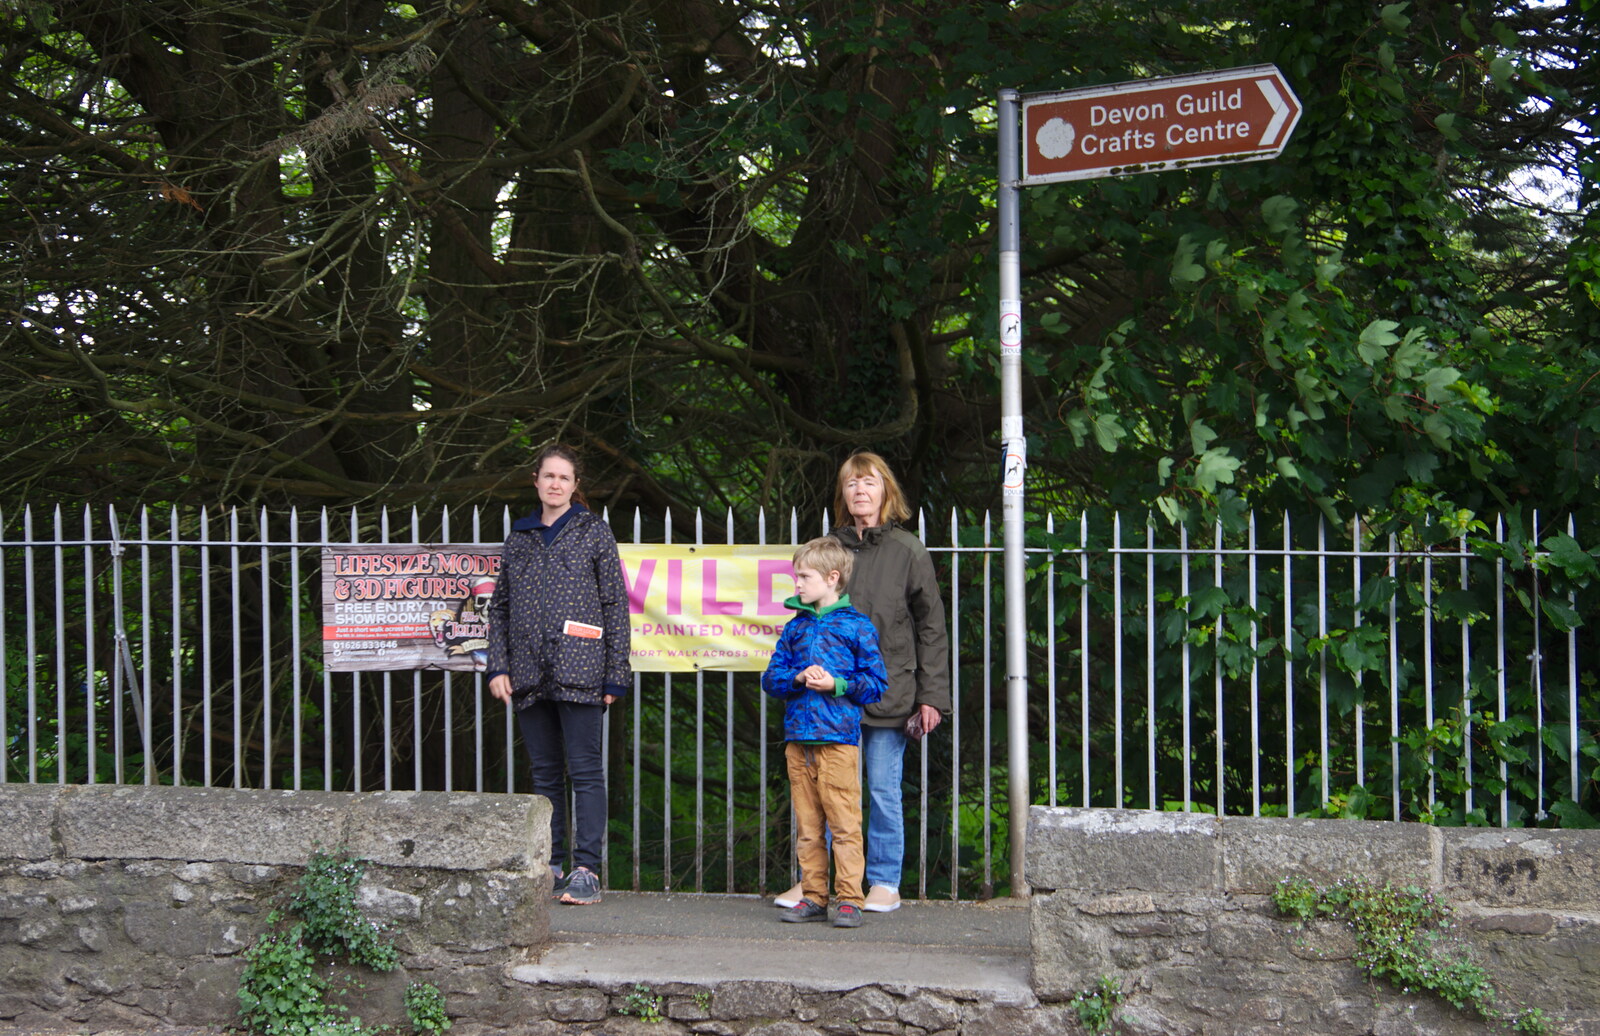 Isobel, Harry and Grandma J wait from The Tom Cobley and a Return to Haytor, Bovey Tracey, Devon - 27th May 2019